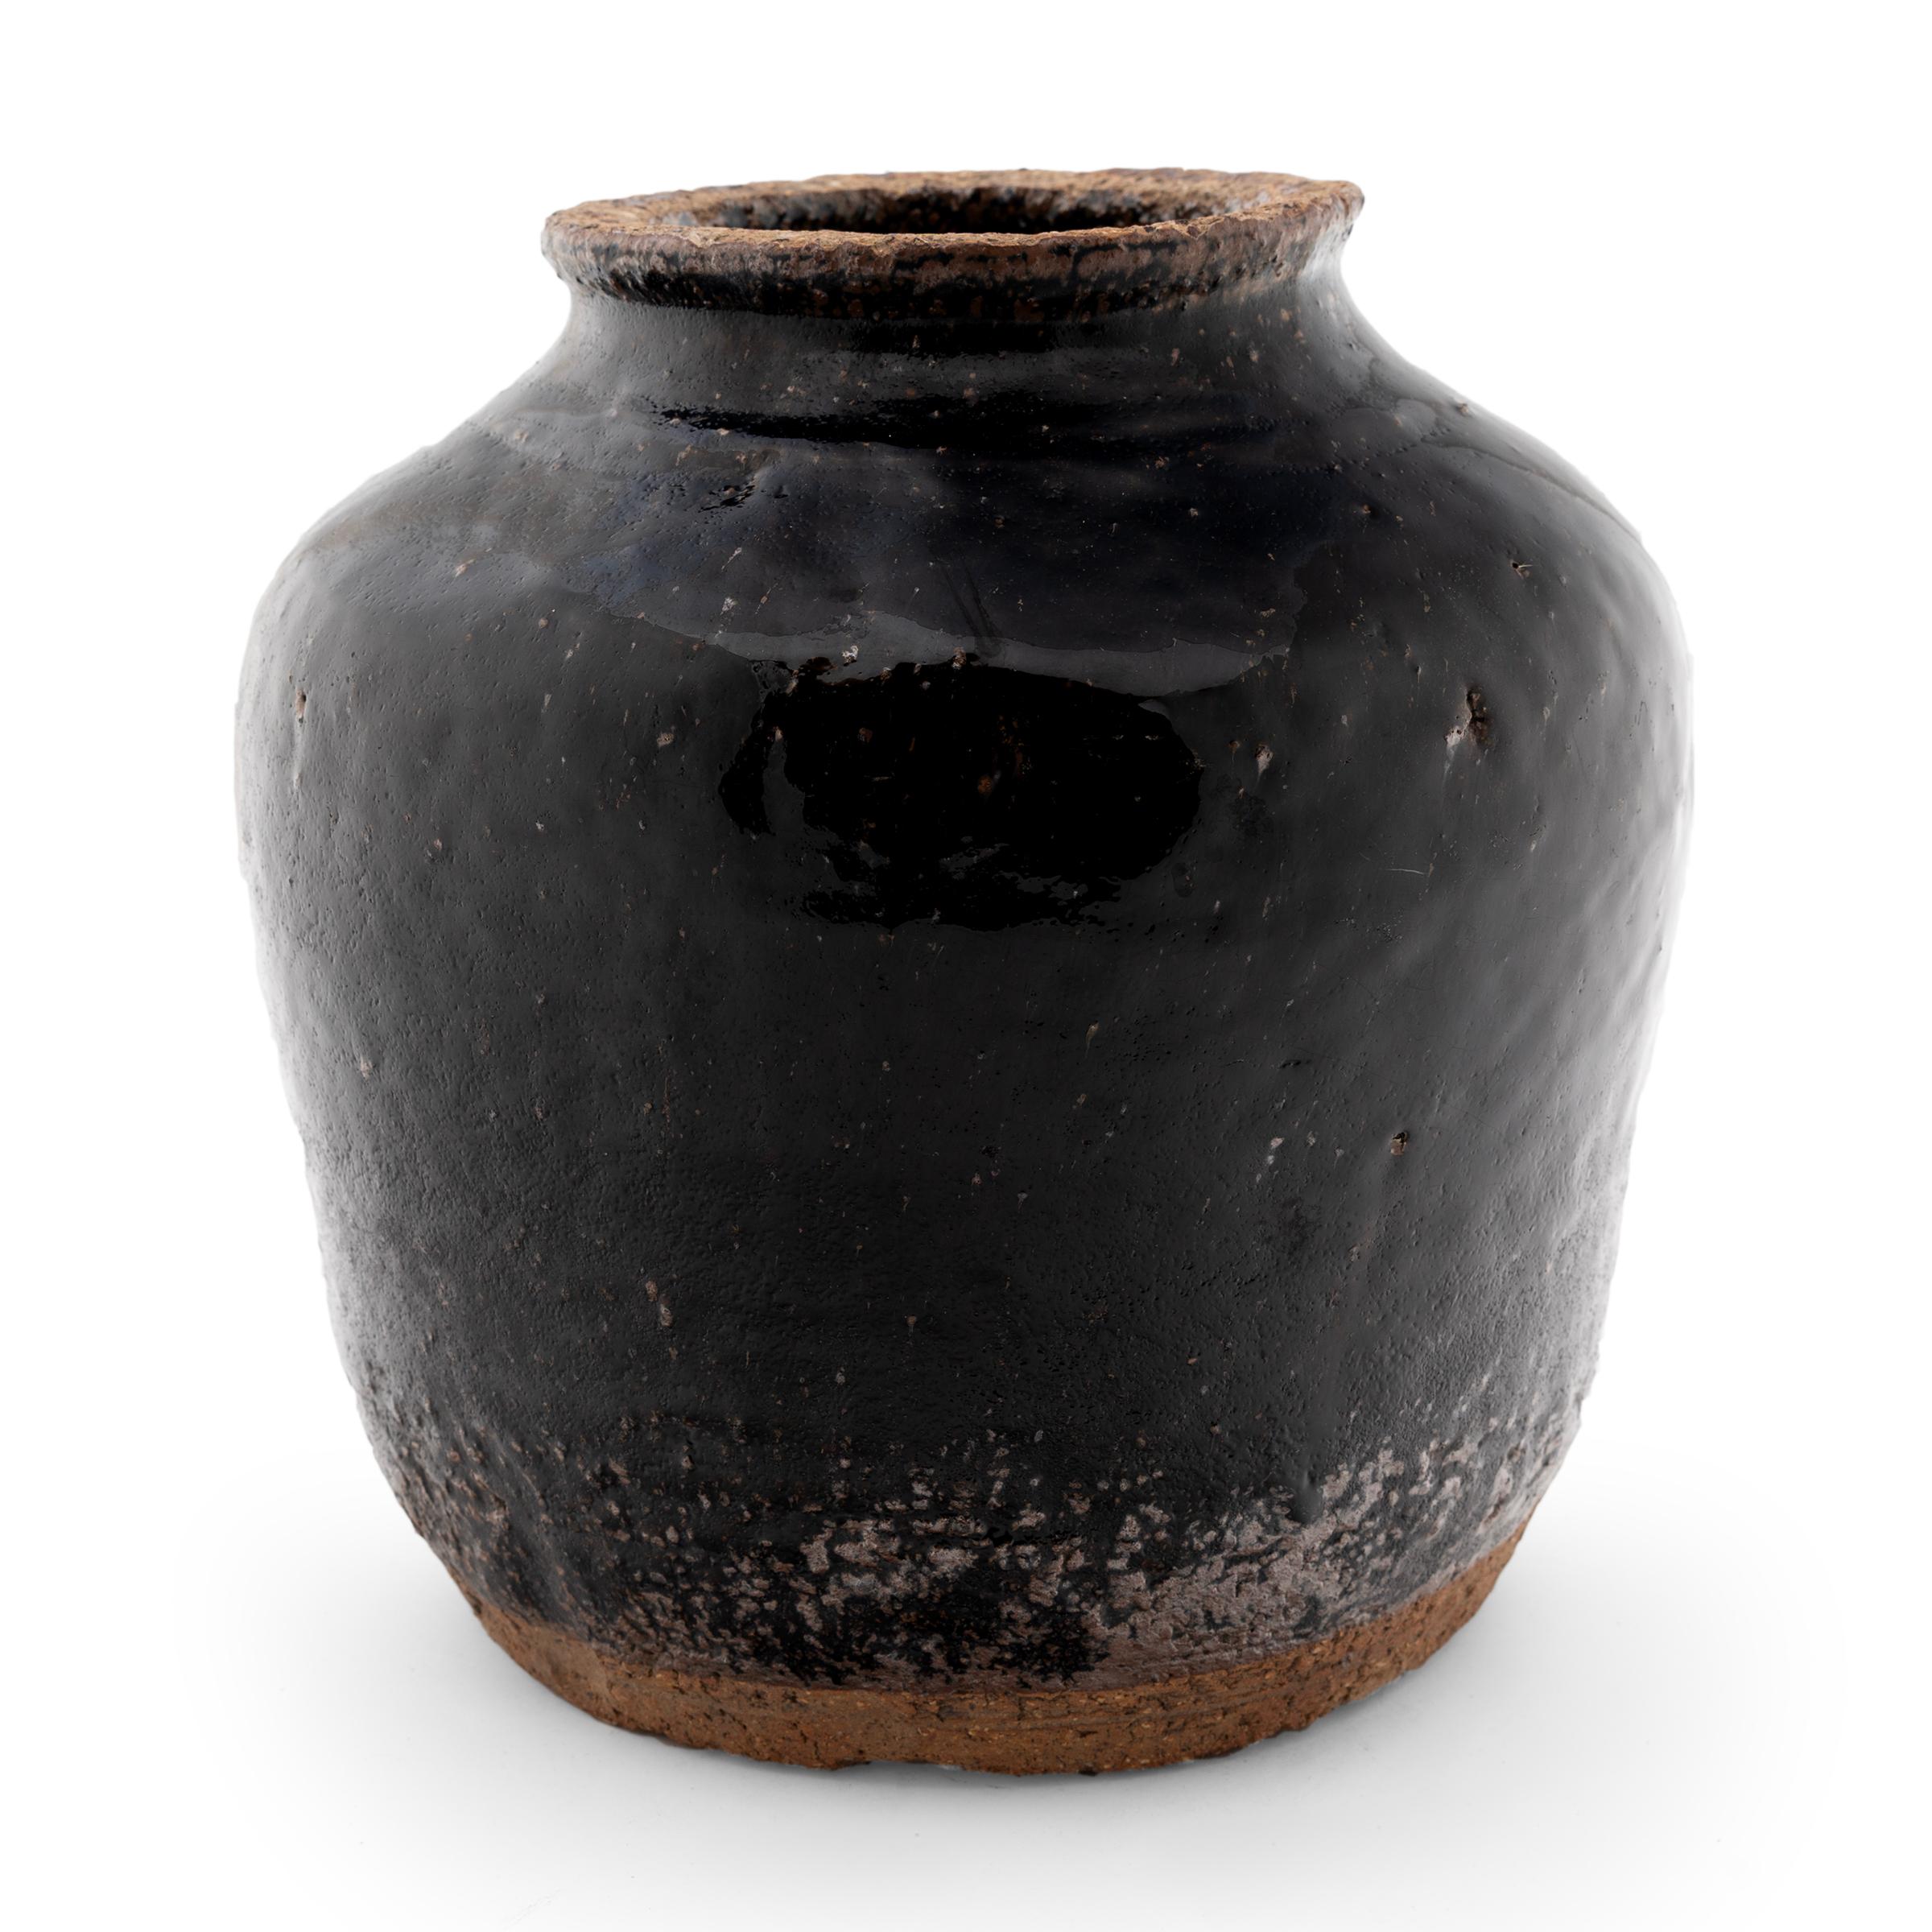 Crafted in the early 20th century, this glazed jar was once used in a Qing-dynasty kitchen to store vinegar, wine, or condiments, as evidenced by its narrow, constricted neck and interior glaze. The jar boasts a thick, dark black glaze over its high